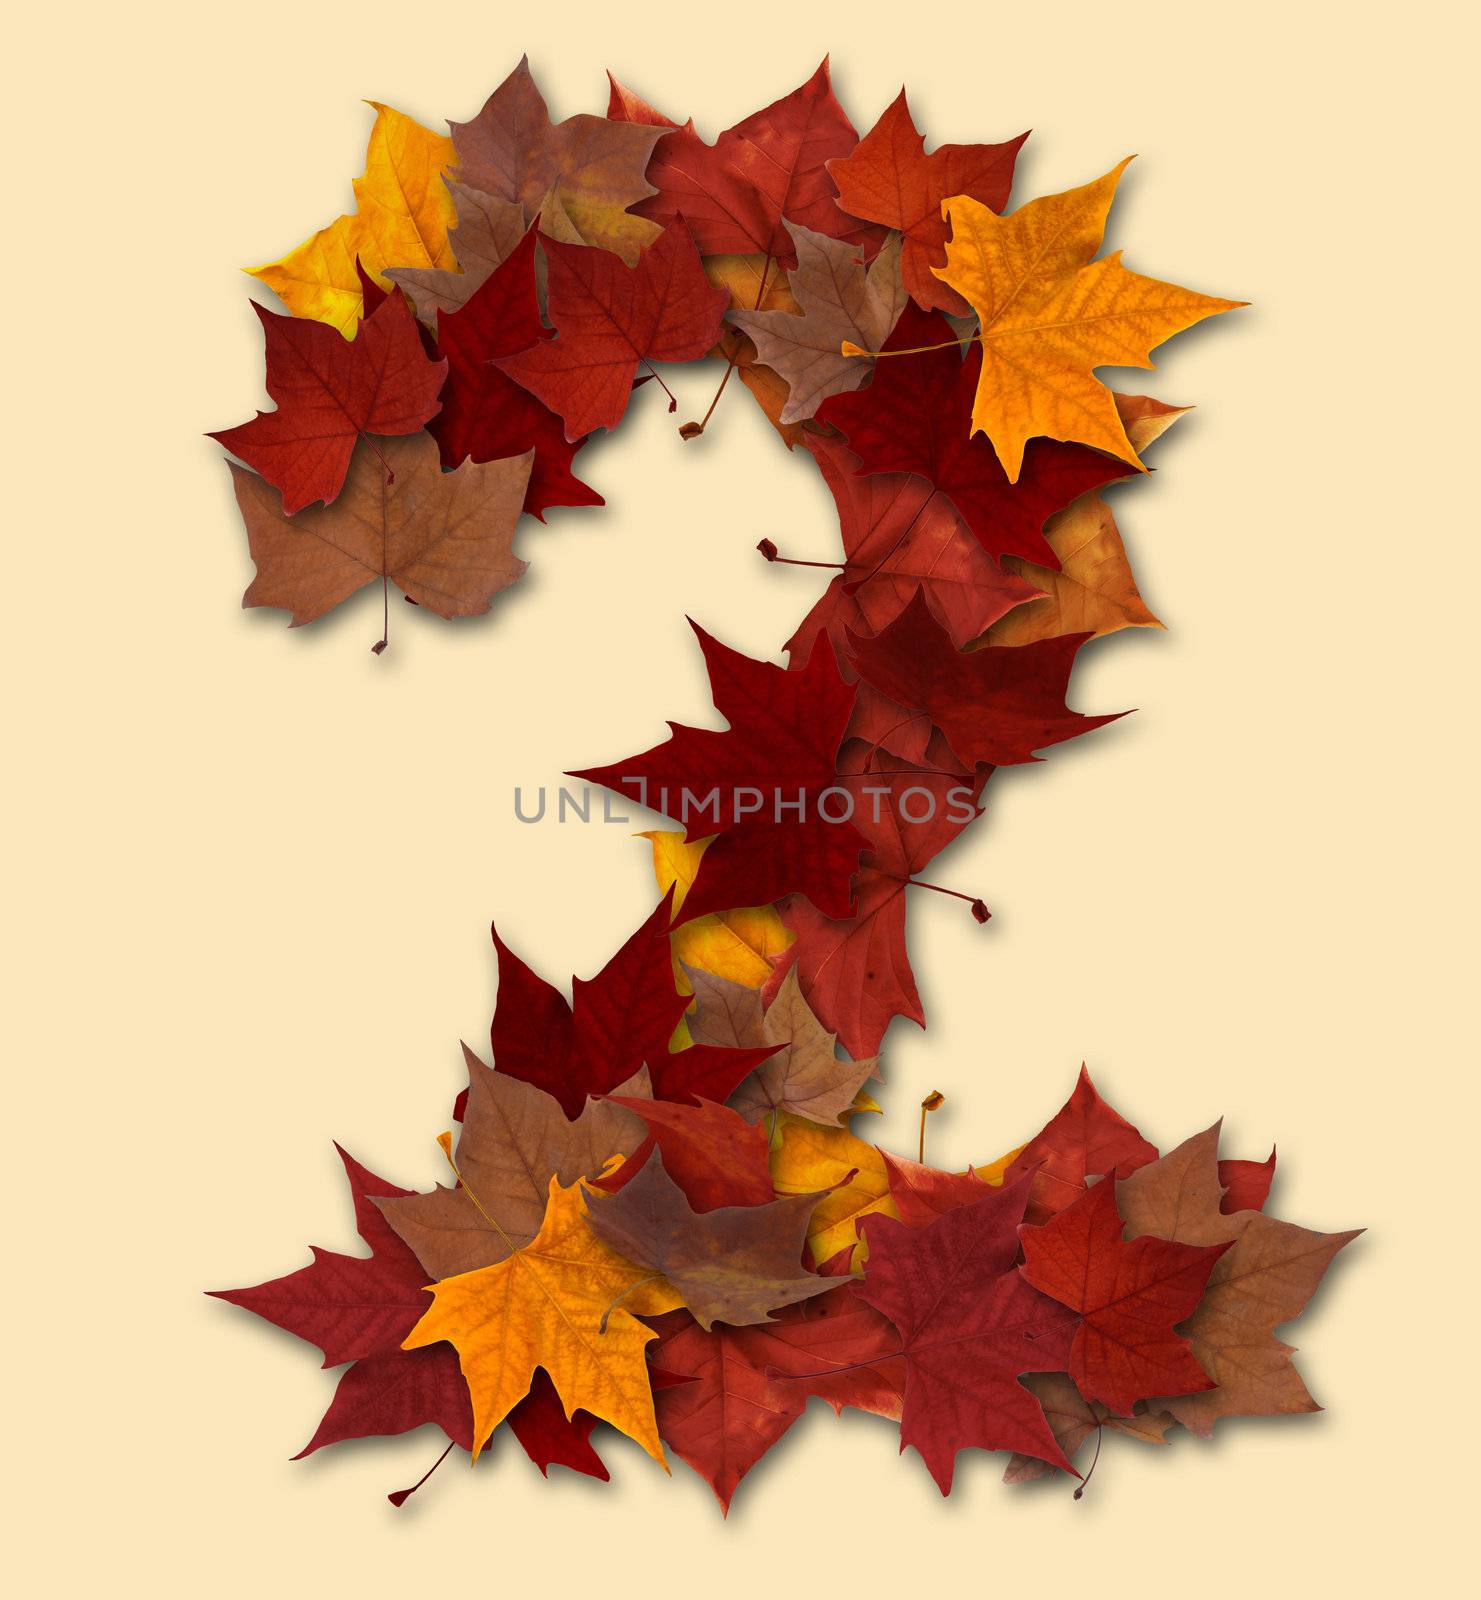 Number 2 drop shadow made with autumn leaves Isolated with clipping path, so you can easily cut it out and place over the top of a design. Find others types in our portfolio to compose your own words.